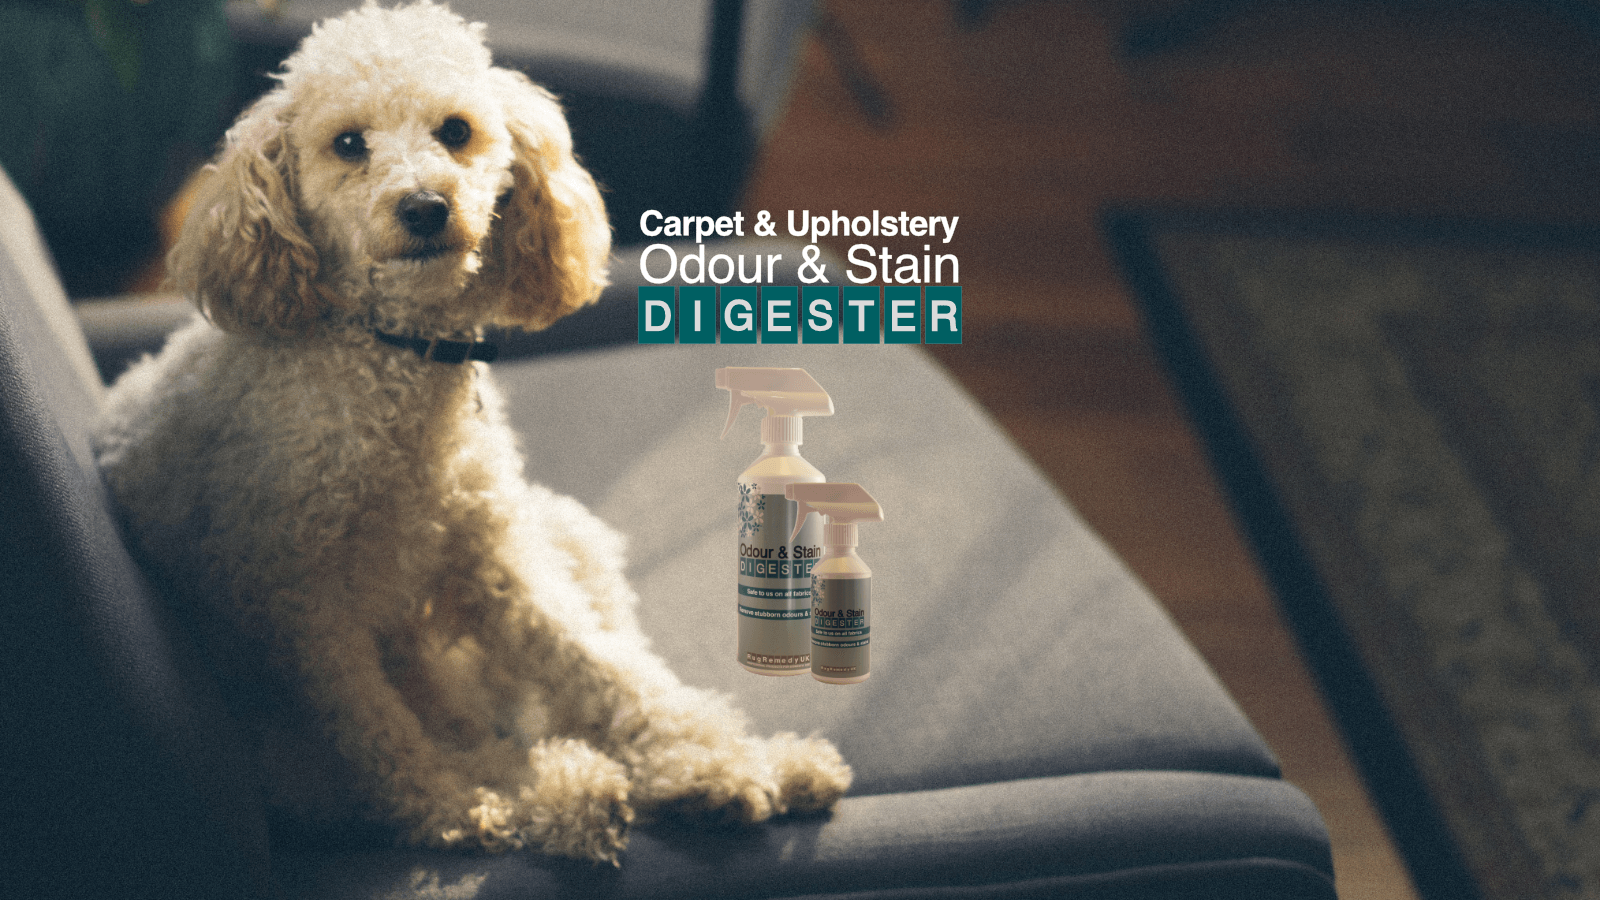 Cute poodle puppy sitting on a sofa with Odour and Stain Digester bottles.